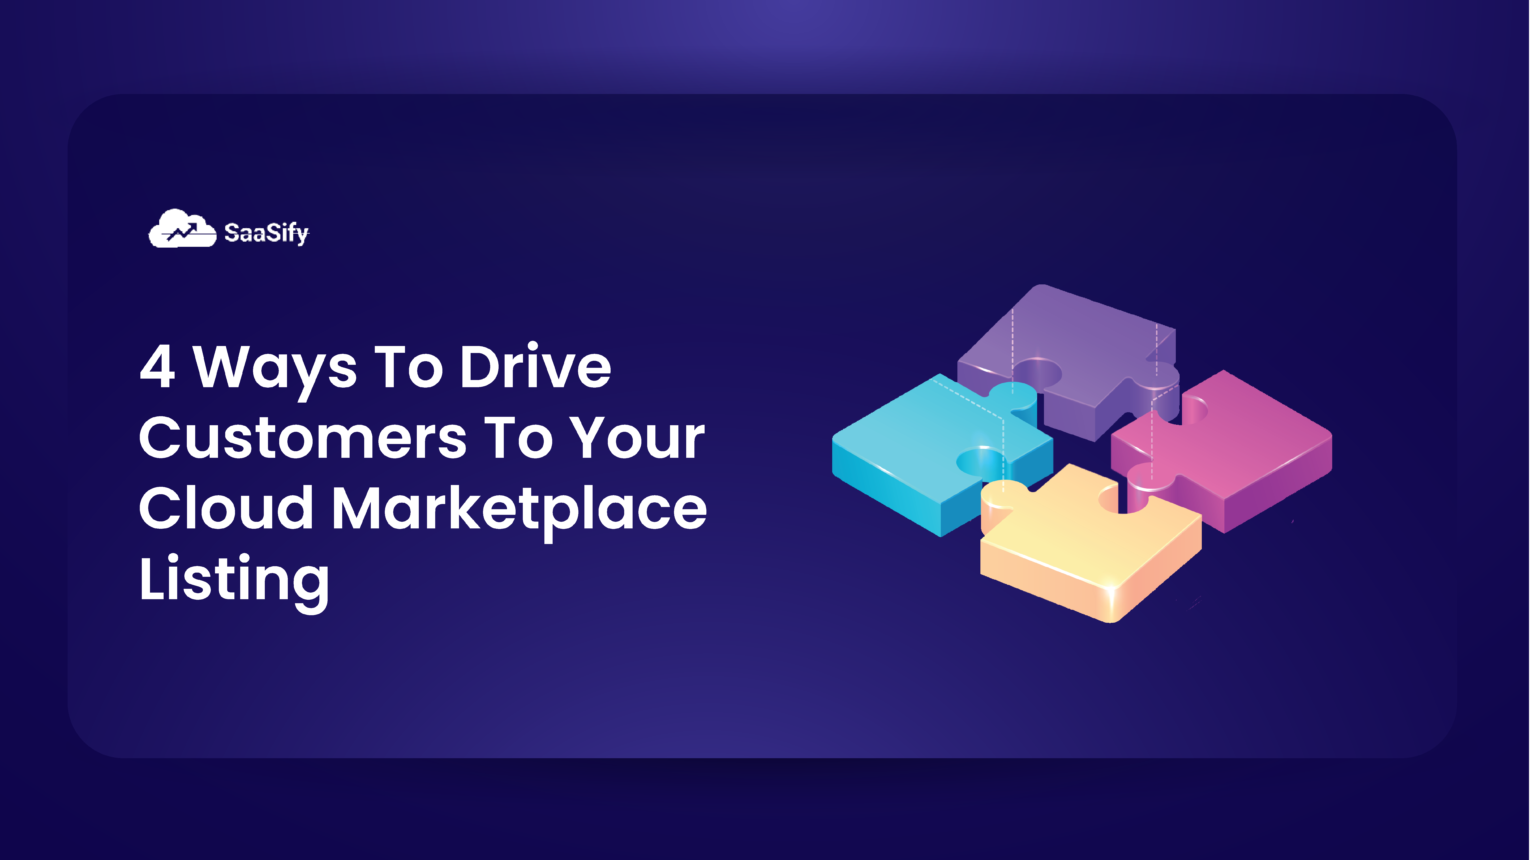 4 Ways To Drive Customers To Your Cloud Marketplace Listing